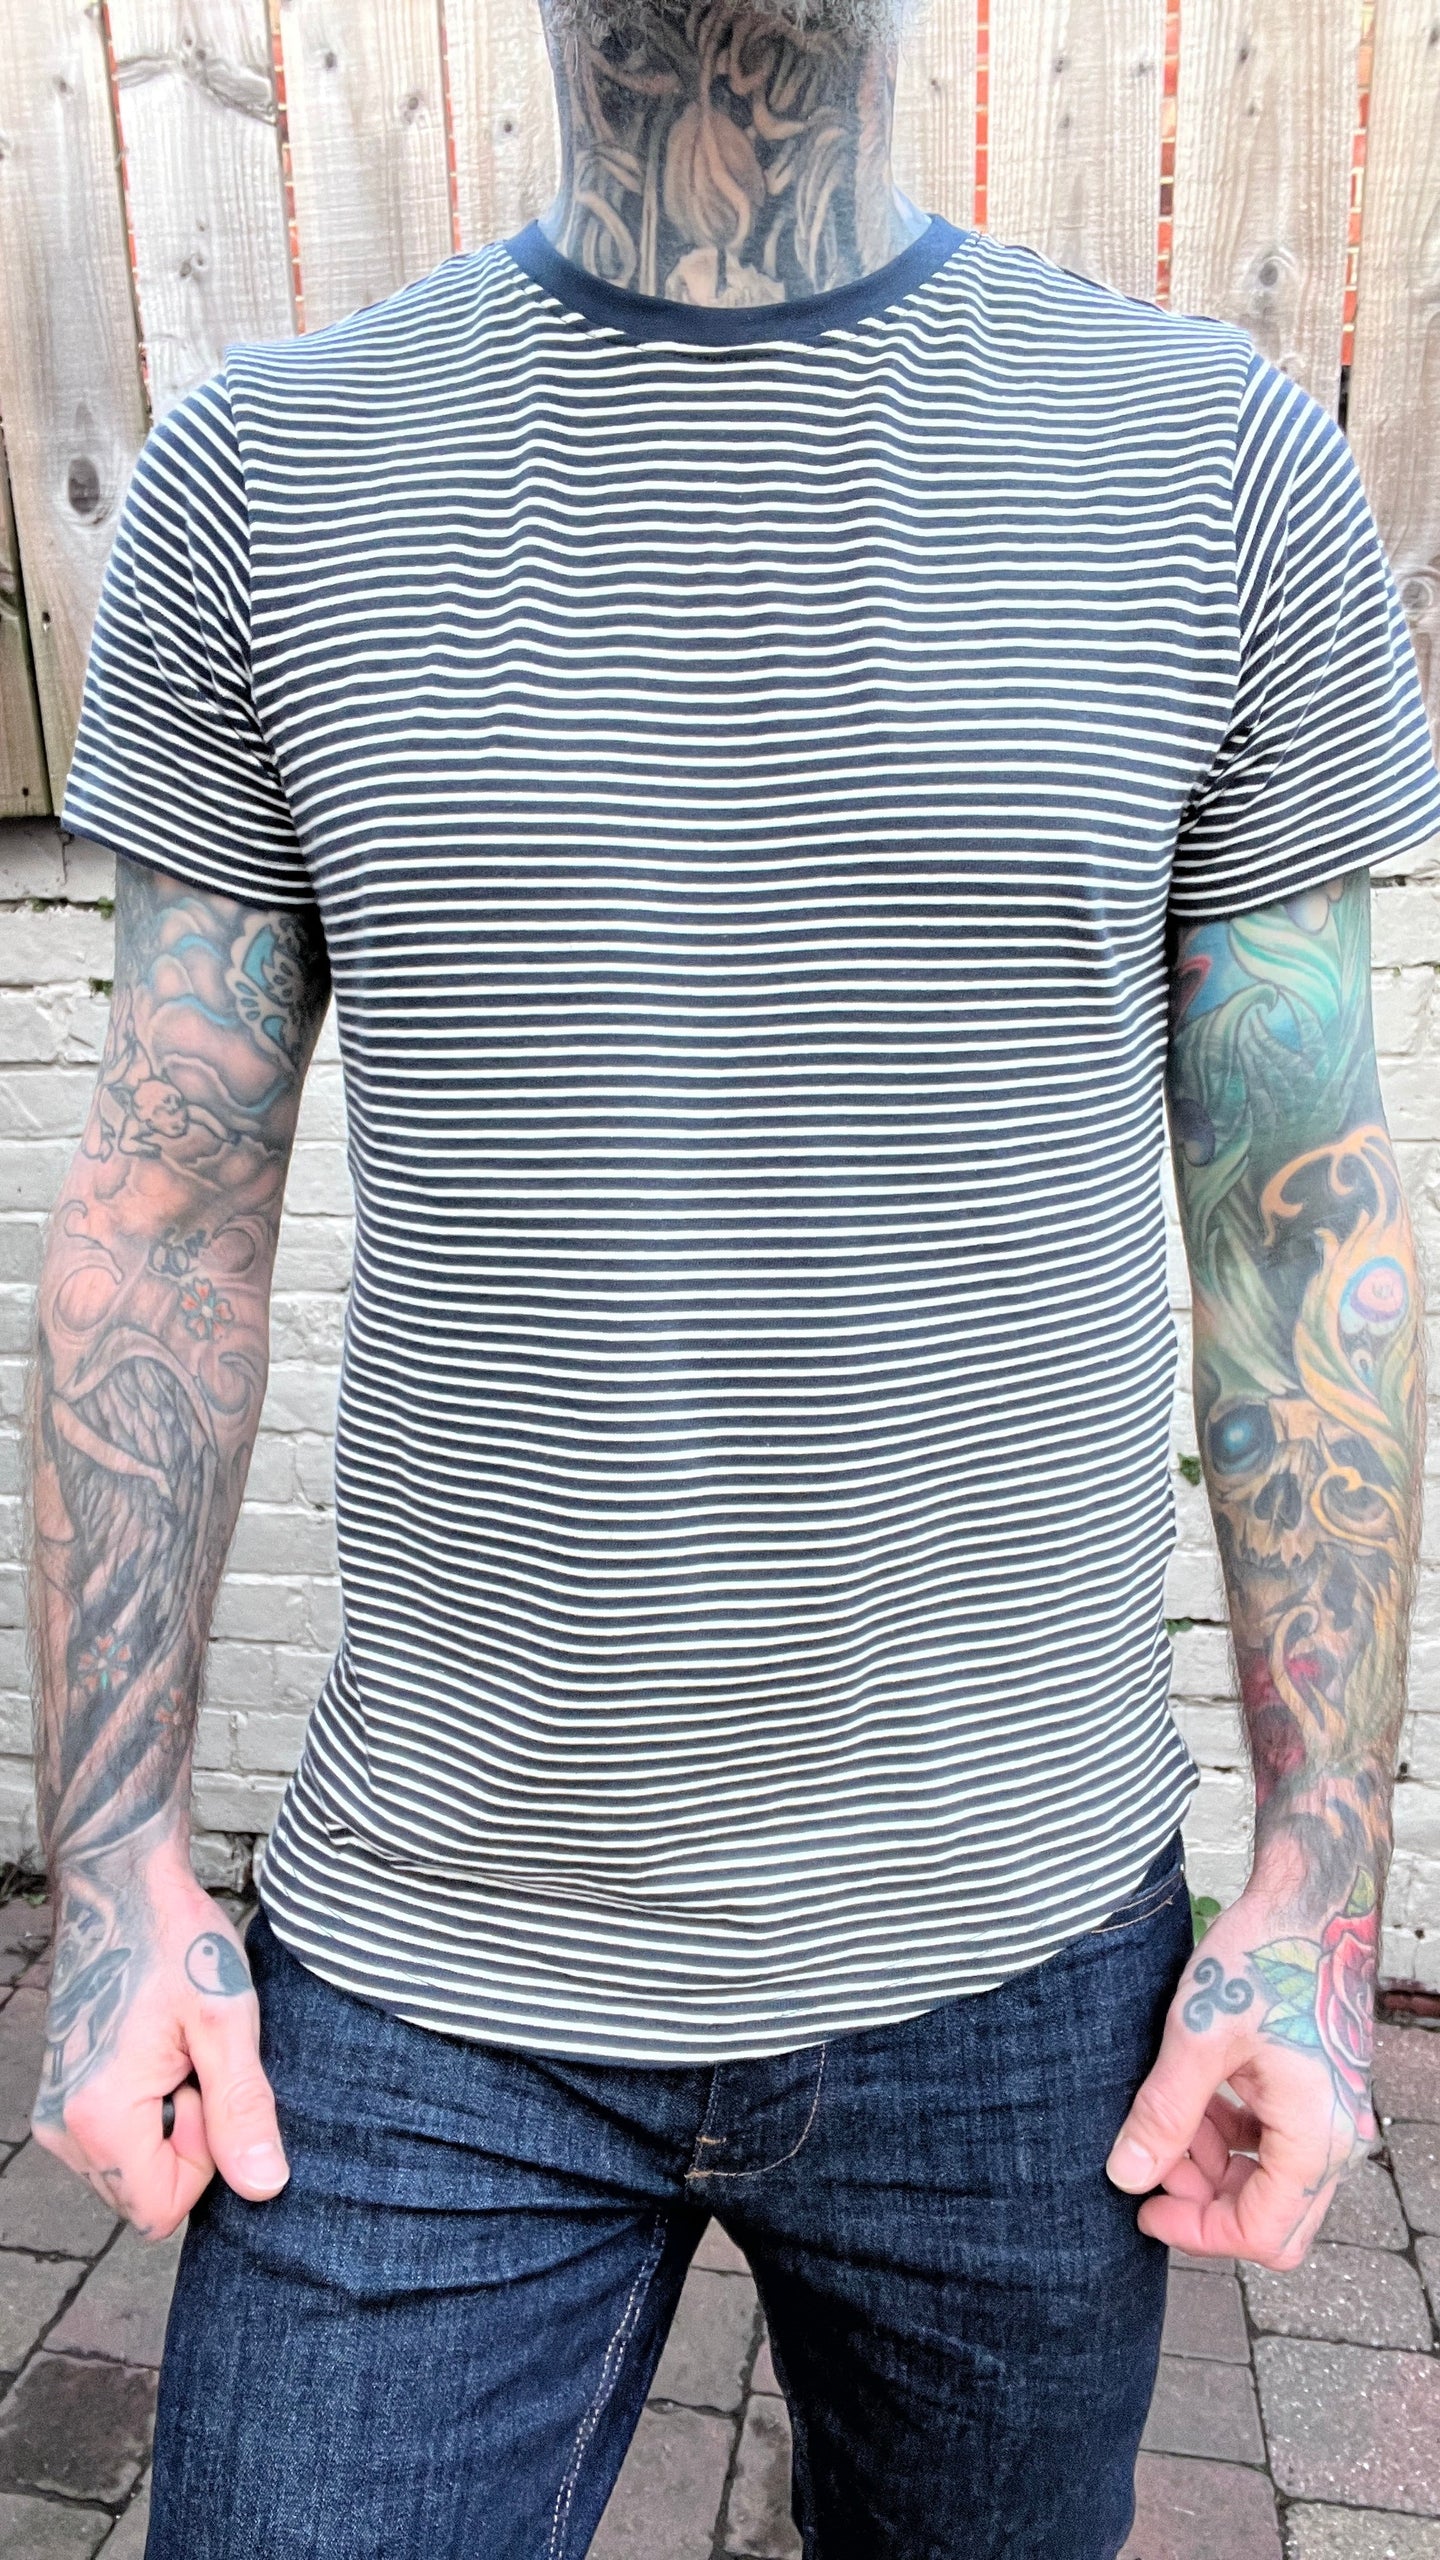 Solid Navy Striped Crew Neck T-Shirt S